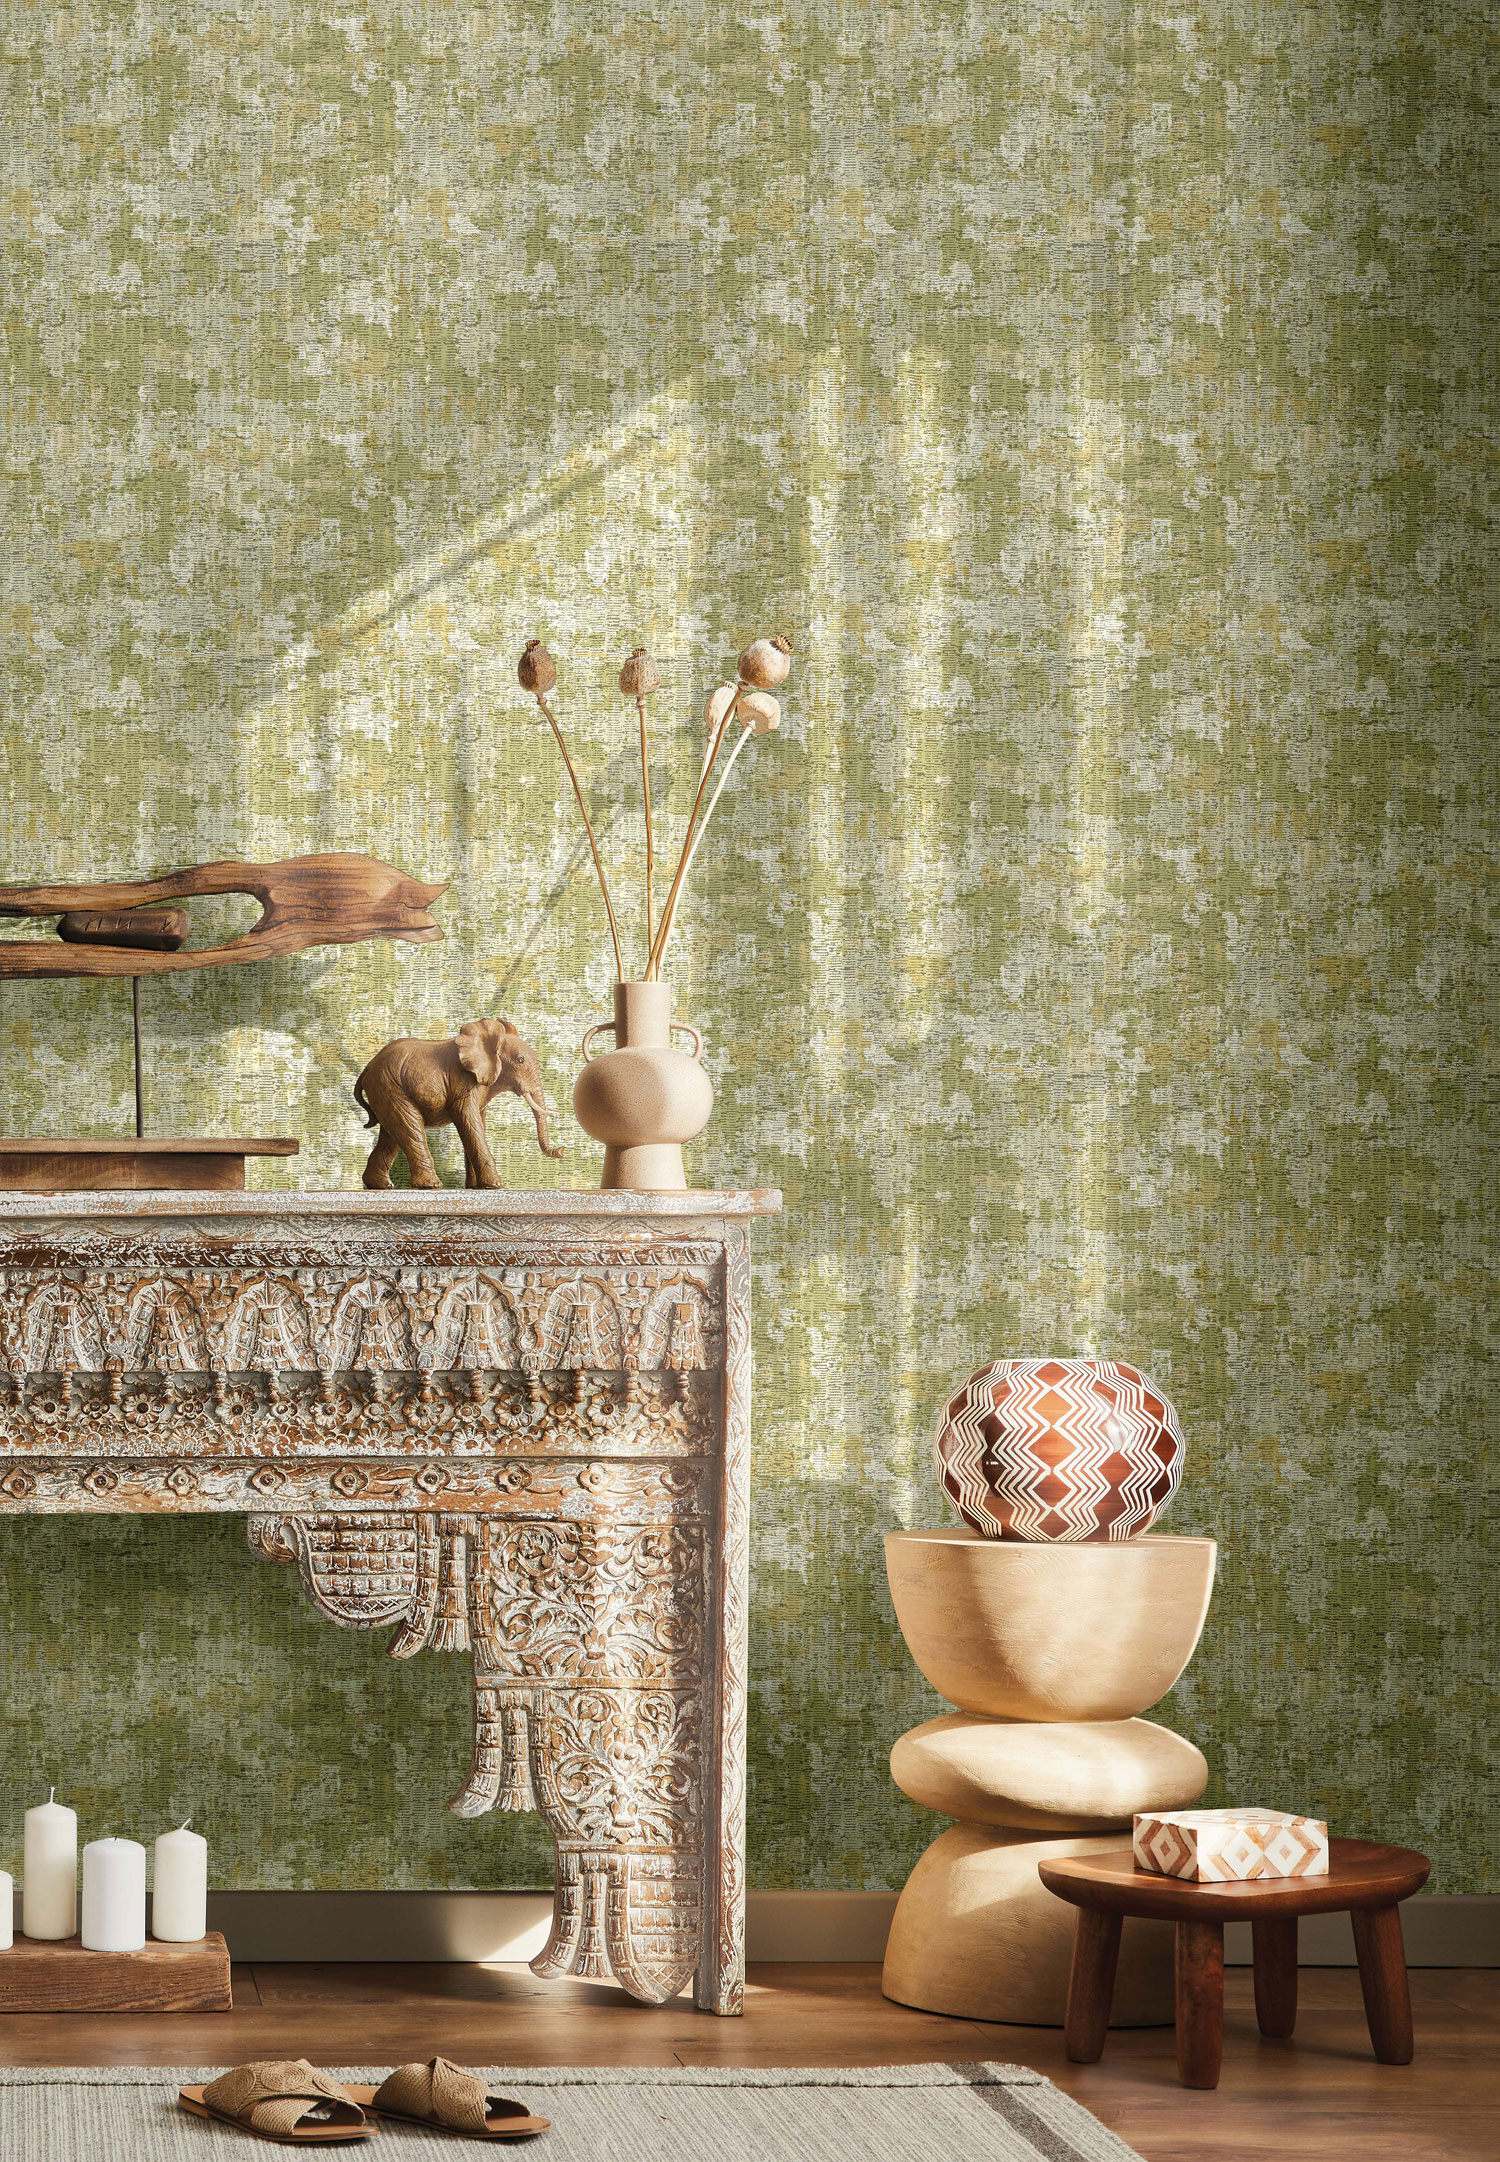 Different types of wallpapers suitable for living rooms, bedrooms, children's rooms, and kitchens, emphasizing resistance to moisture and wipeability.